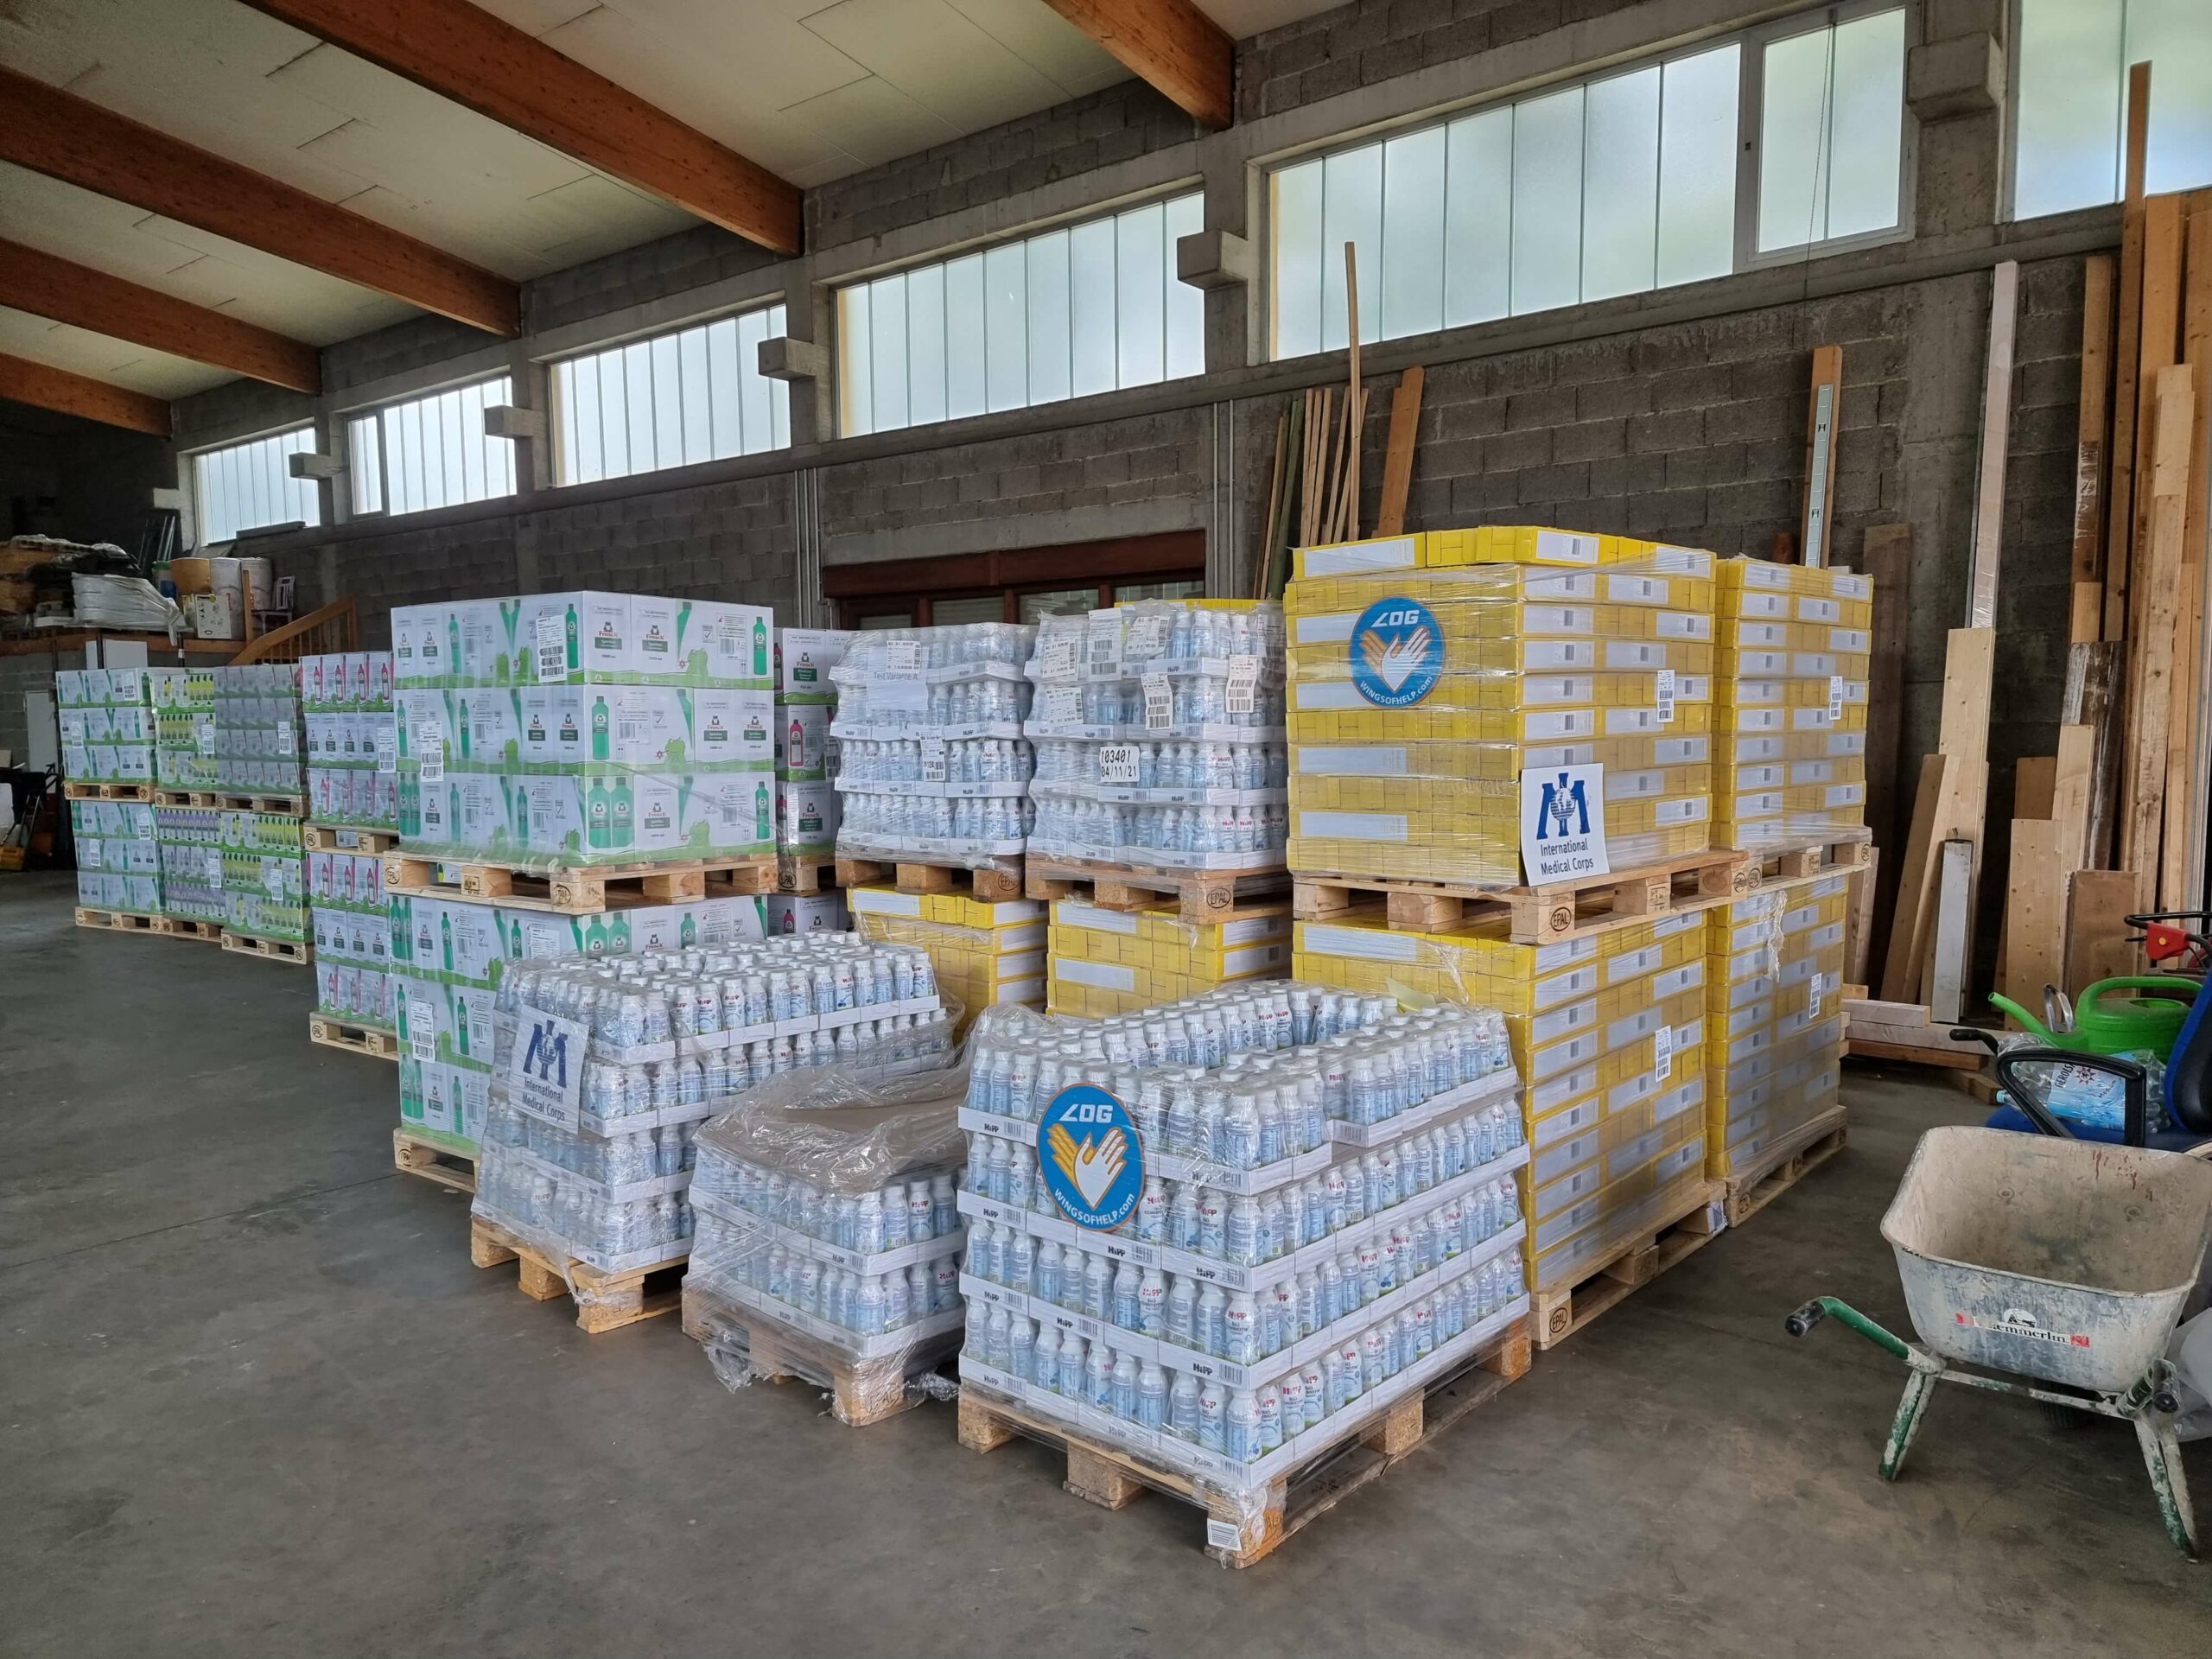 Supplies ready for distribution with the help of Luftfahrt ohne Grenzen/Wings of Help, our German partner organization from Frankfurt.